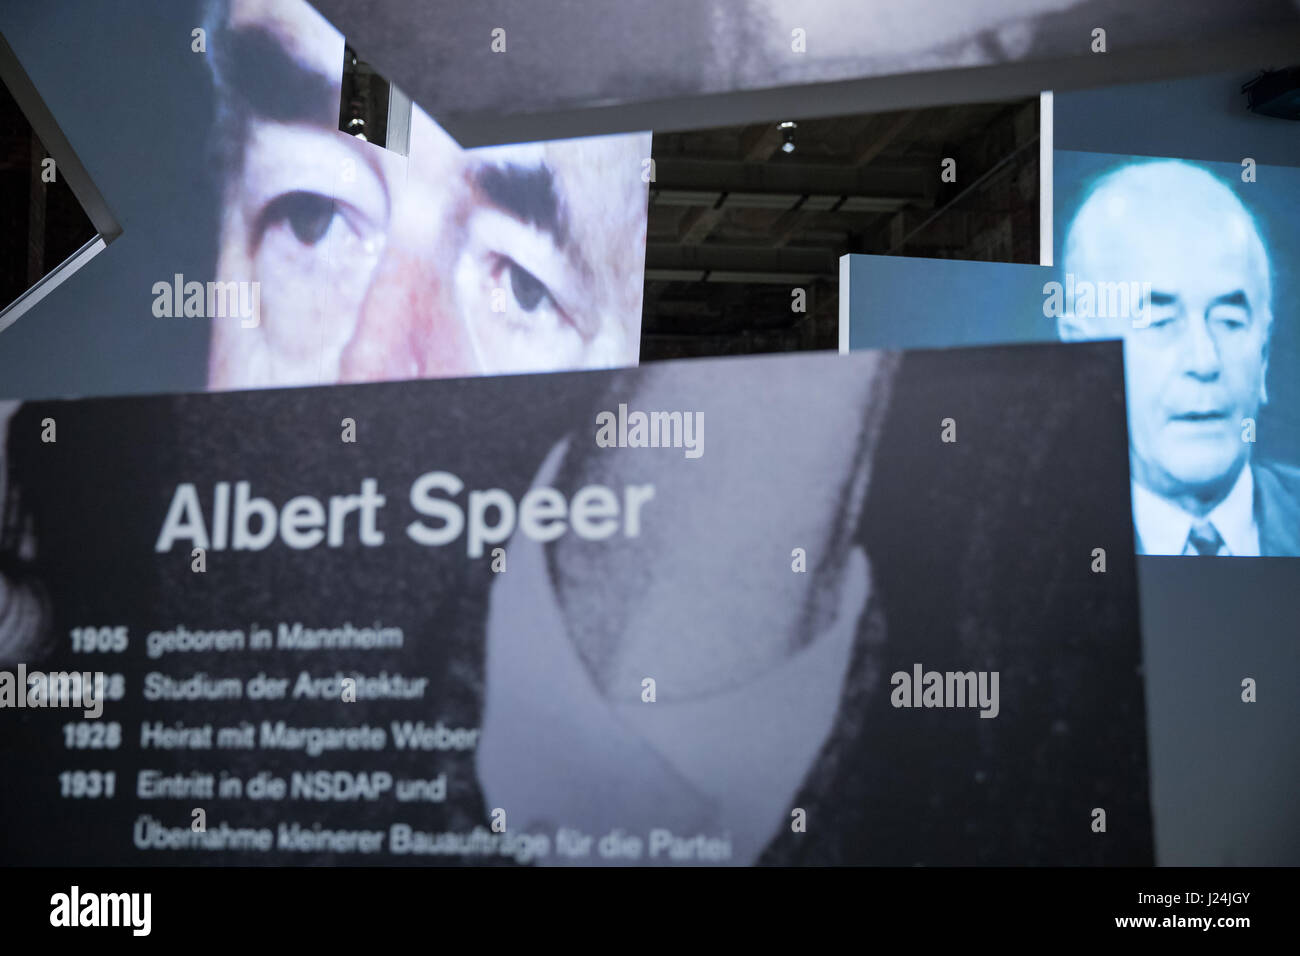 Projections of historical documents can be seen at the exhibition 'Albert Speer in der Bundesrepublik. Vom Umgang mit deutscher Vergangenheit' (lit. 'Albert Speer in the Federal Republic. On handling German past' at the Dokumentationszentrum Reichsparteigelaende (lit. 'Documentation Center Reichs Party Grounds') in Nuremberg, Germany, 25 April 2017. Using historical documents, the exhibition wants to proof that Speer was not, as assumed, an apolitical technocrate who did not know about the crimes of the Nazis. Photo: Daniel Karmann/dpa Stock Photo